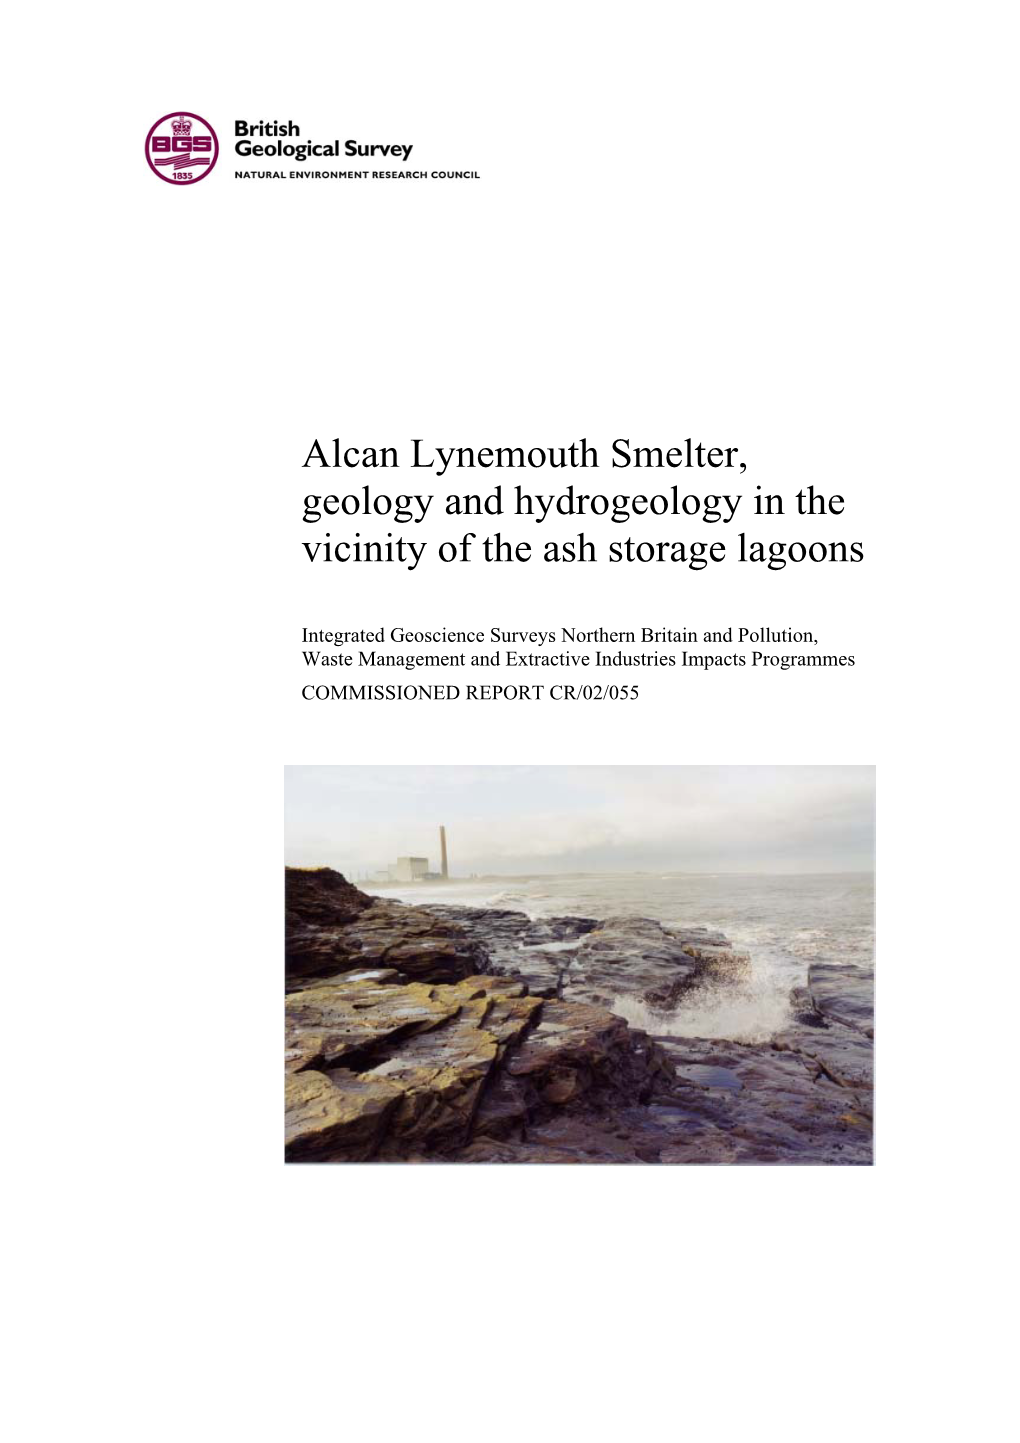 Alcan Lynemouth Smelter, Geology and Hydrogeology in the Vicinity of the Ash Storage Lagoons